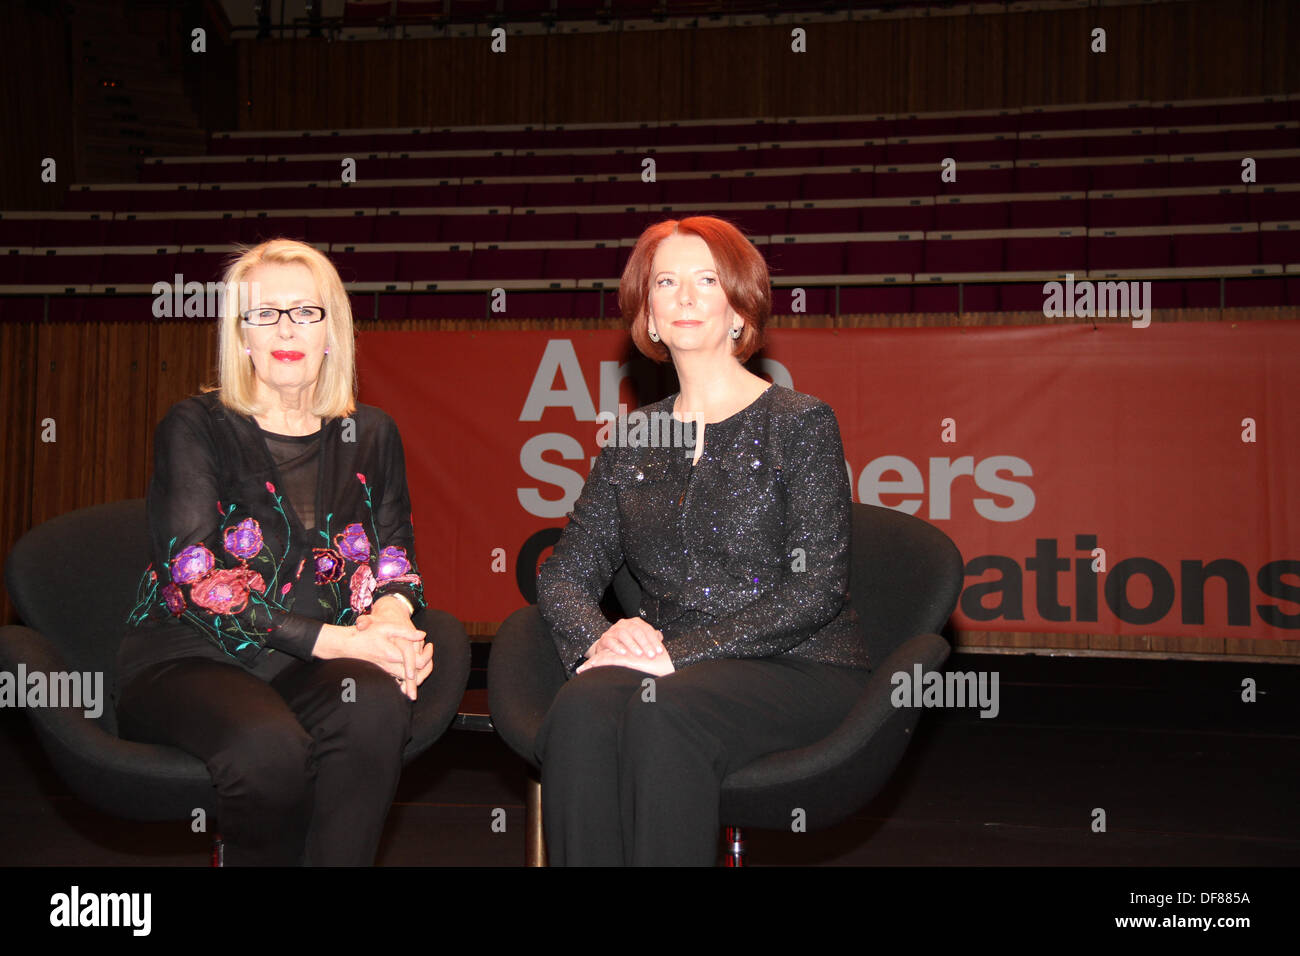 Sydney, Australia. 30th Sep, 2013. Julia Gillard makes her first public appearance since leaving the Prime Ministership in an interview with Anne Summers at the Sydney Opera House. Photos taken at photo-call before the event. Pictured are Anne Summers (L) and former Australian Prime Minister Julia Gillard (R). Credit:  Richard Milnes/Alamy Live News Stock Photo